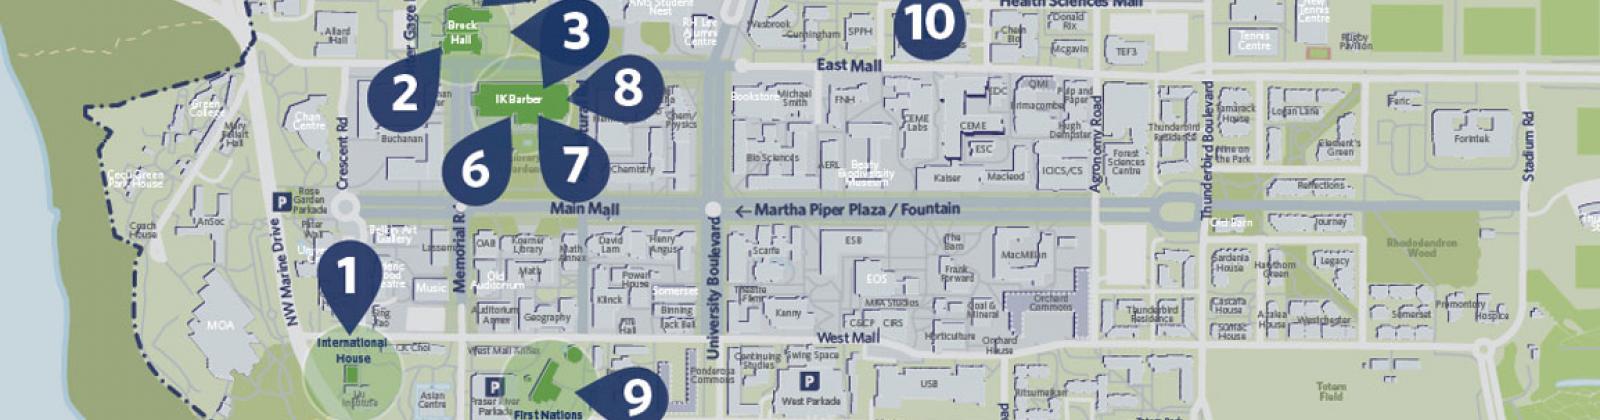 UBC_Support_Locations_Map